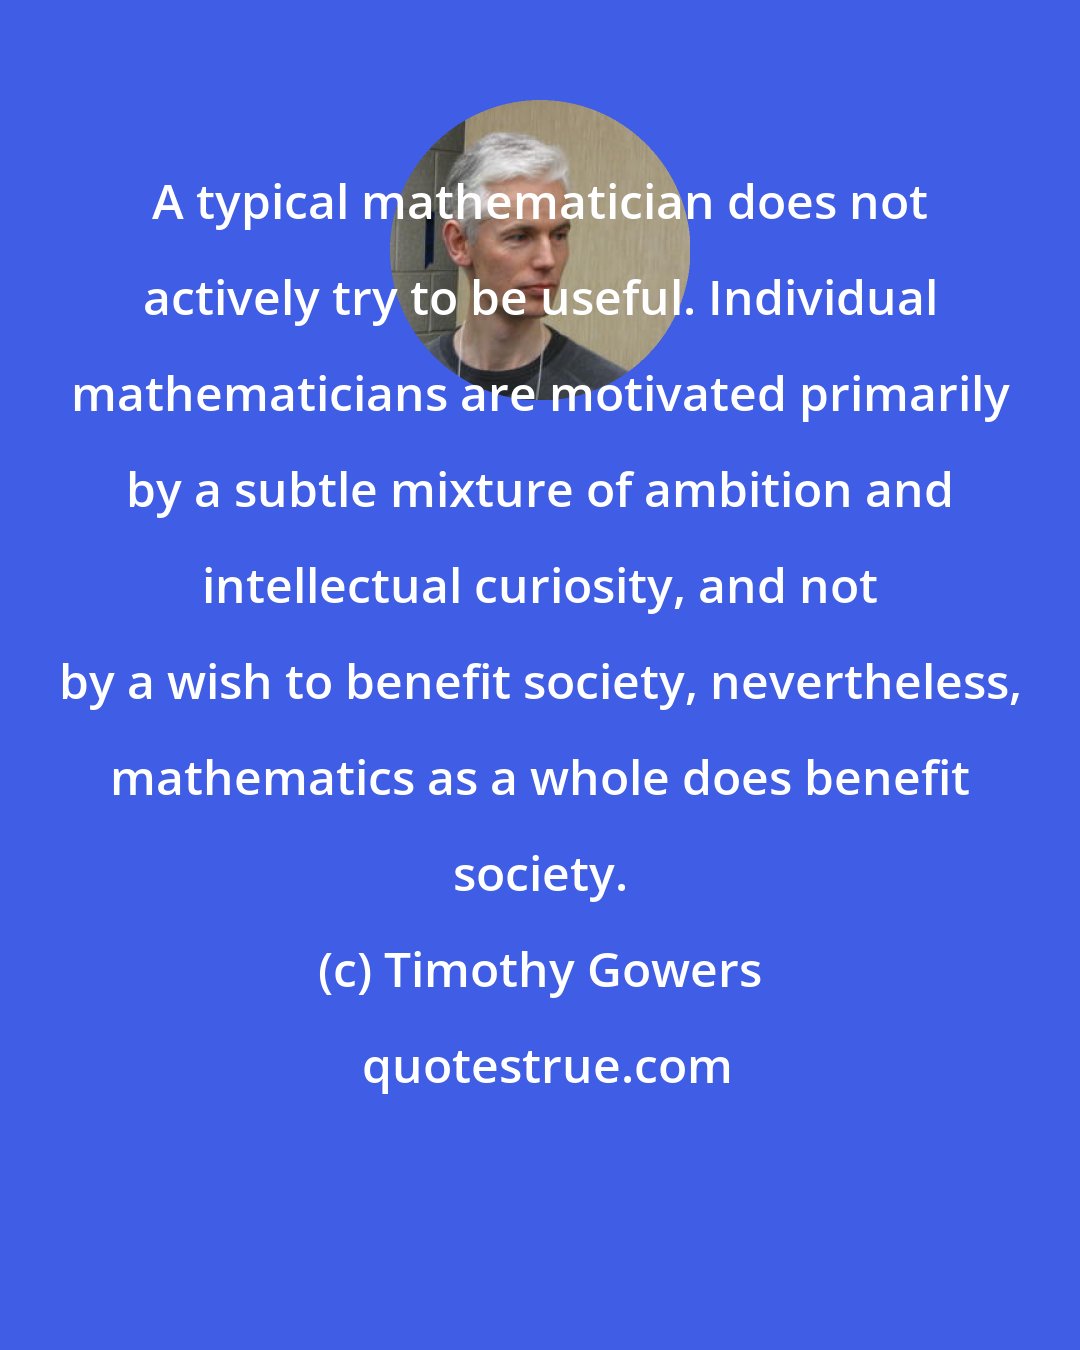 Timothy Gowers: A typical mathematician does not actively try to be useful. Individual mathematicians are motivated primarily by a subtle mixture of ambition and intellectual curiosity, and not by a wish to benefit society, nevertheless, mathematics as a whole does benefit society.